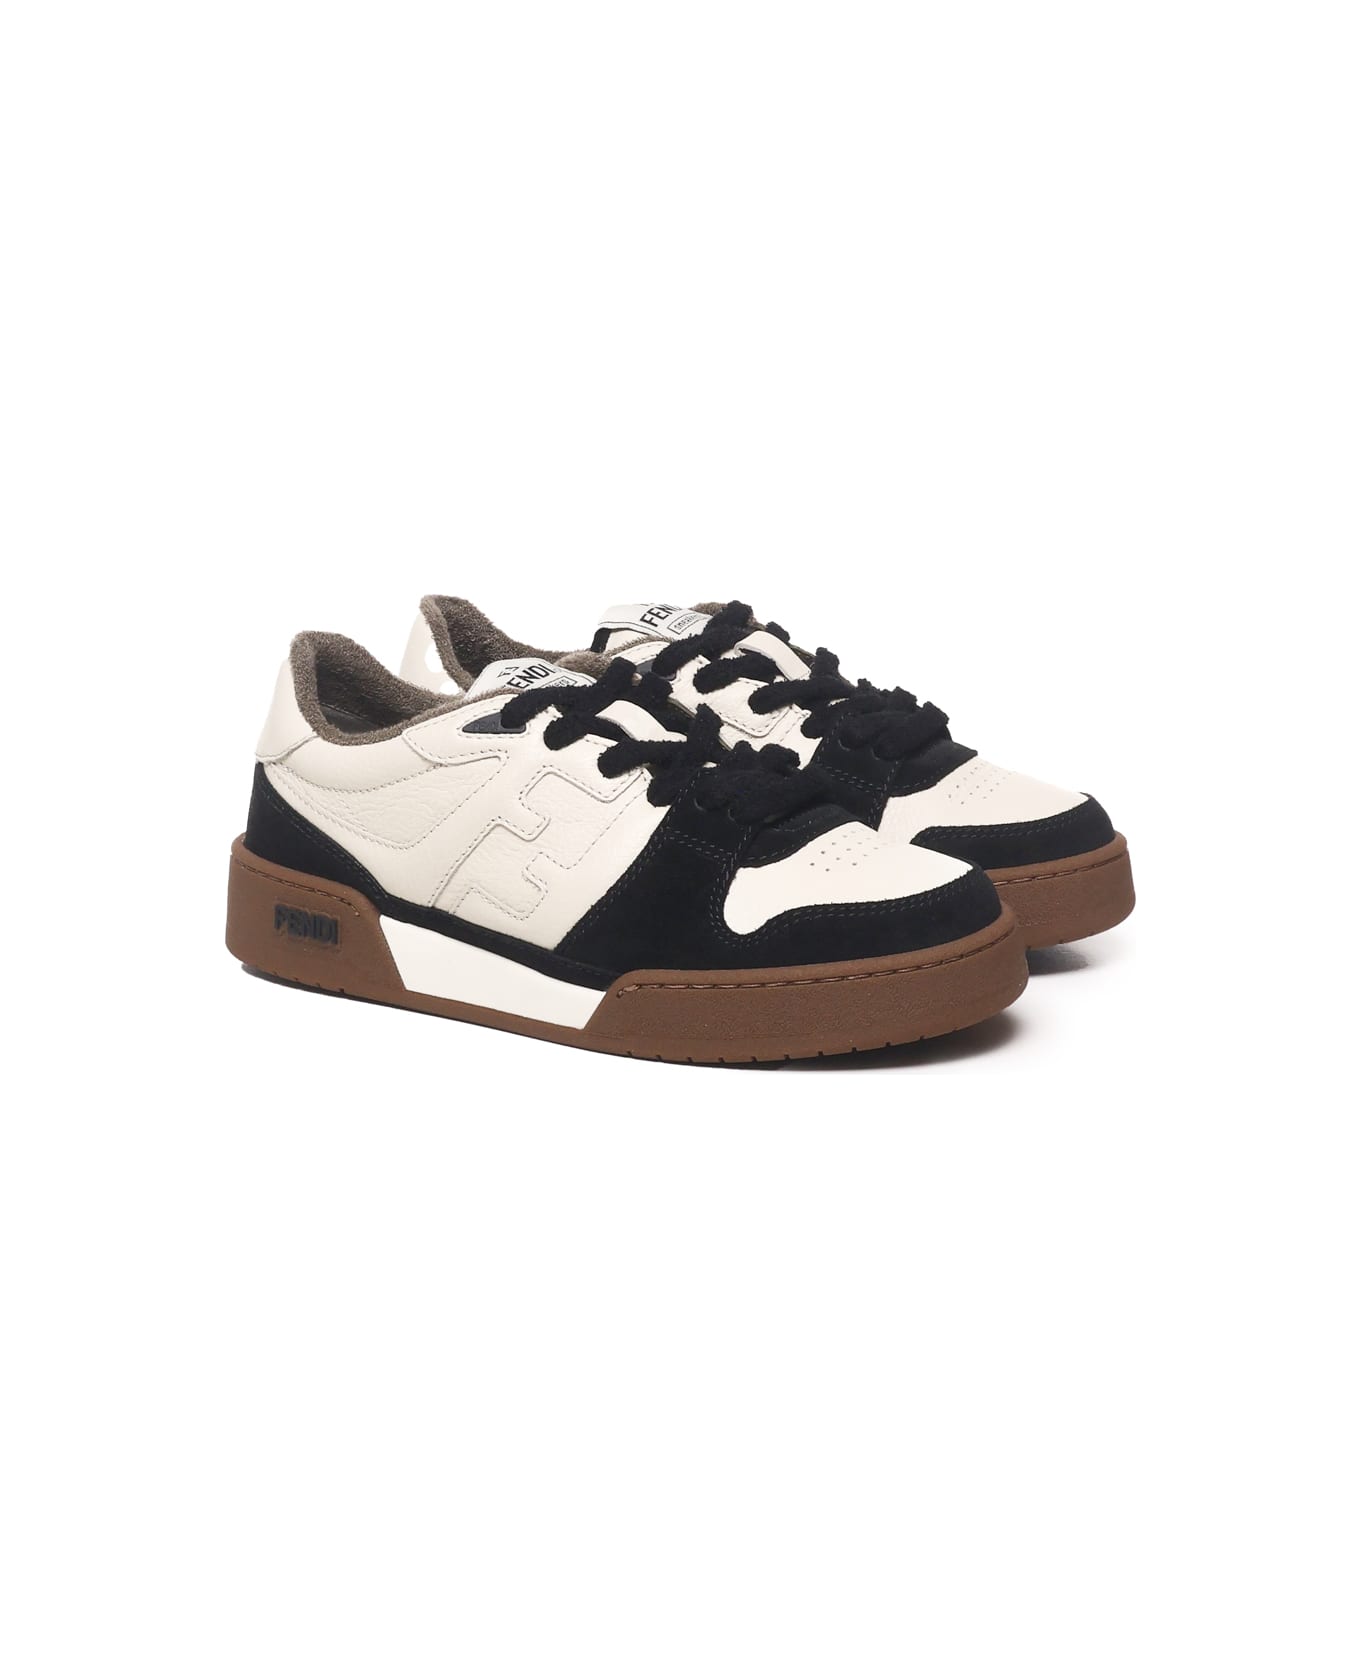 Fendi Match Sneakers In Leather With Suede Inserts - NERO MILK NERO